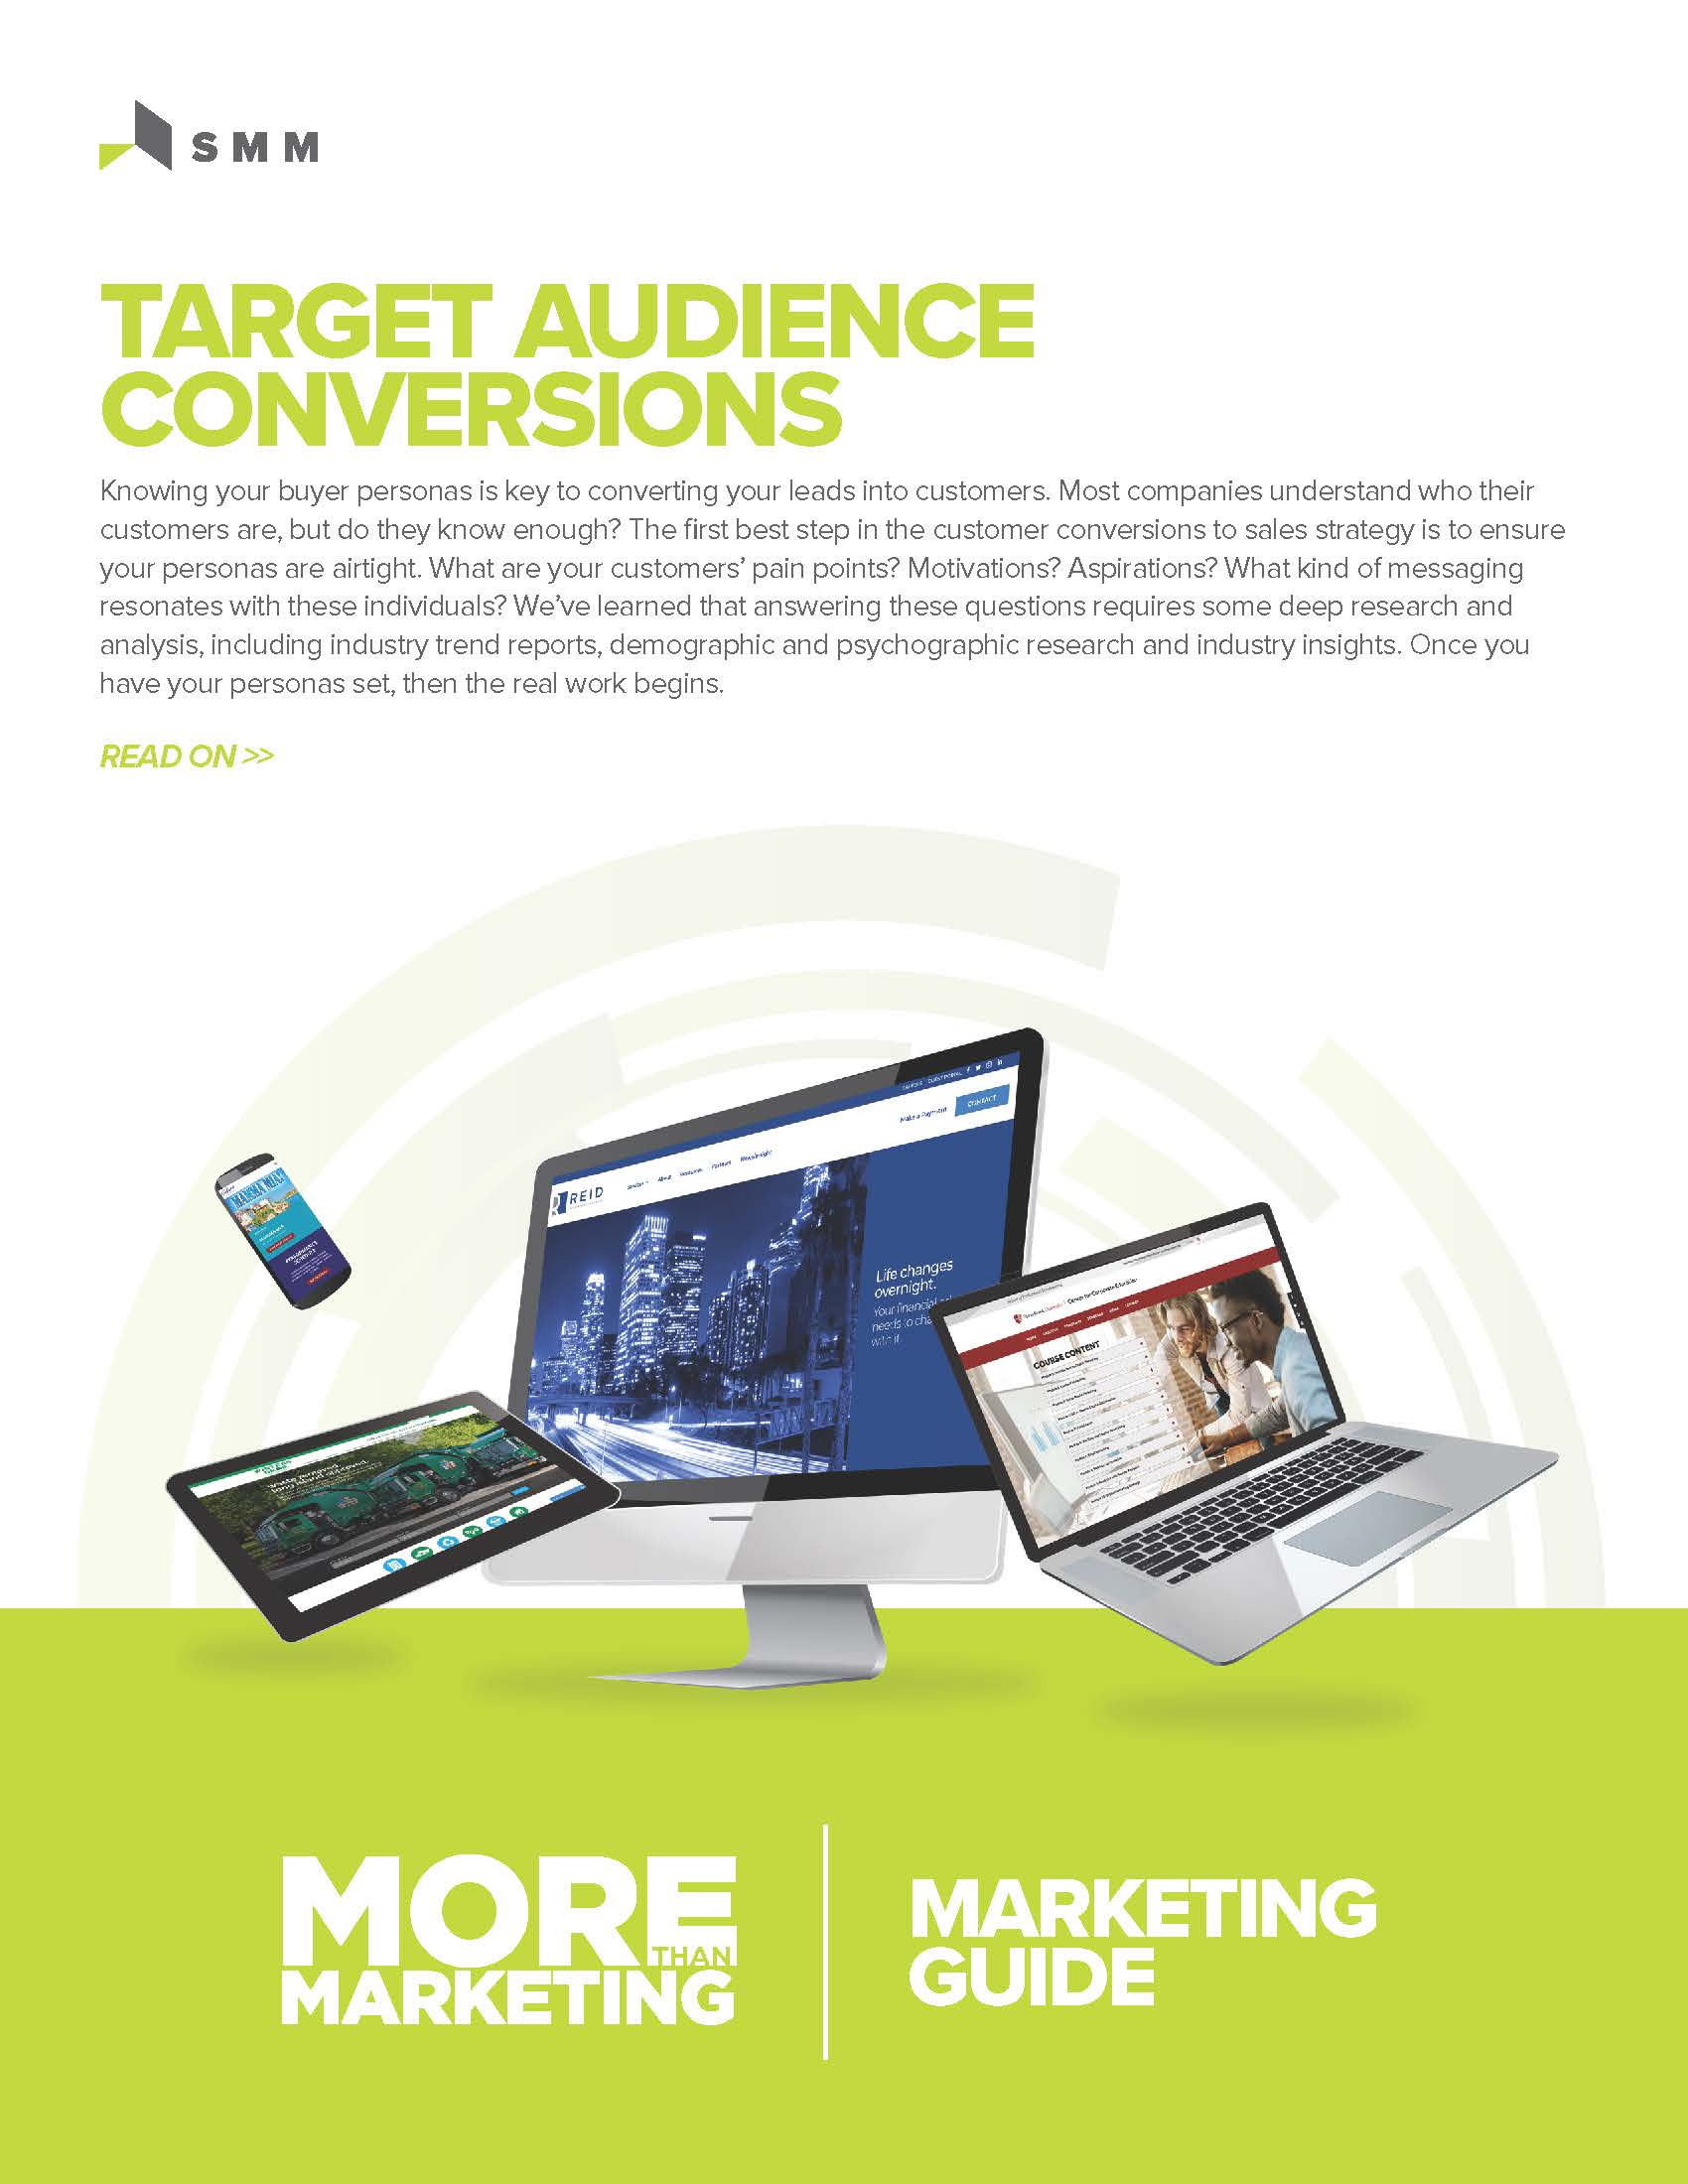 SMM Target Audience Conversions Guide Thumbnail